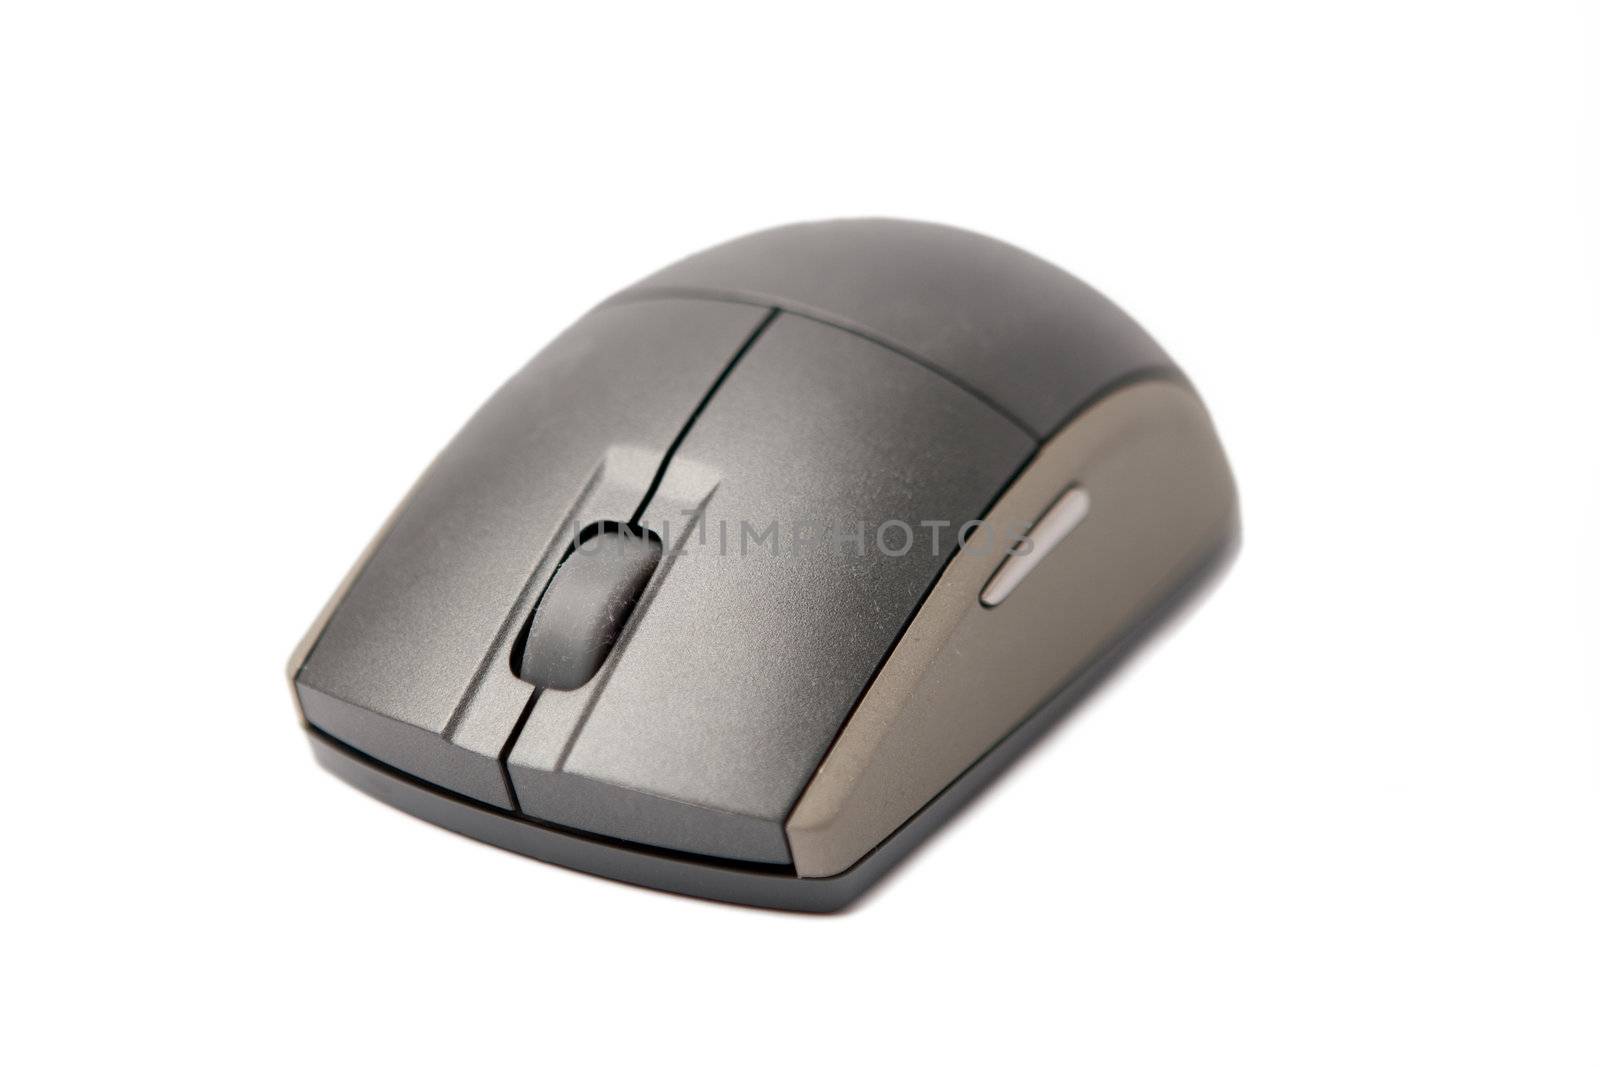 Wireless Computer Mouse by svenler